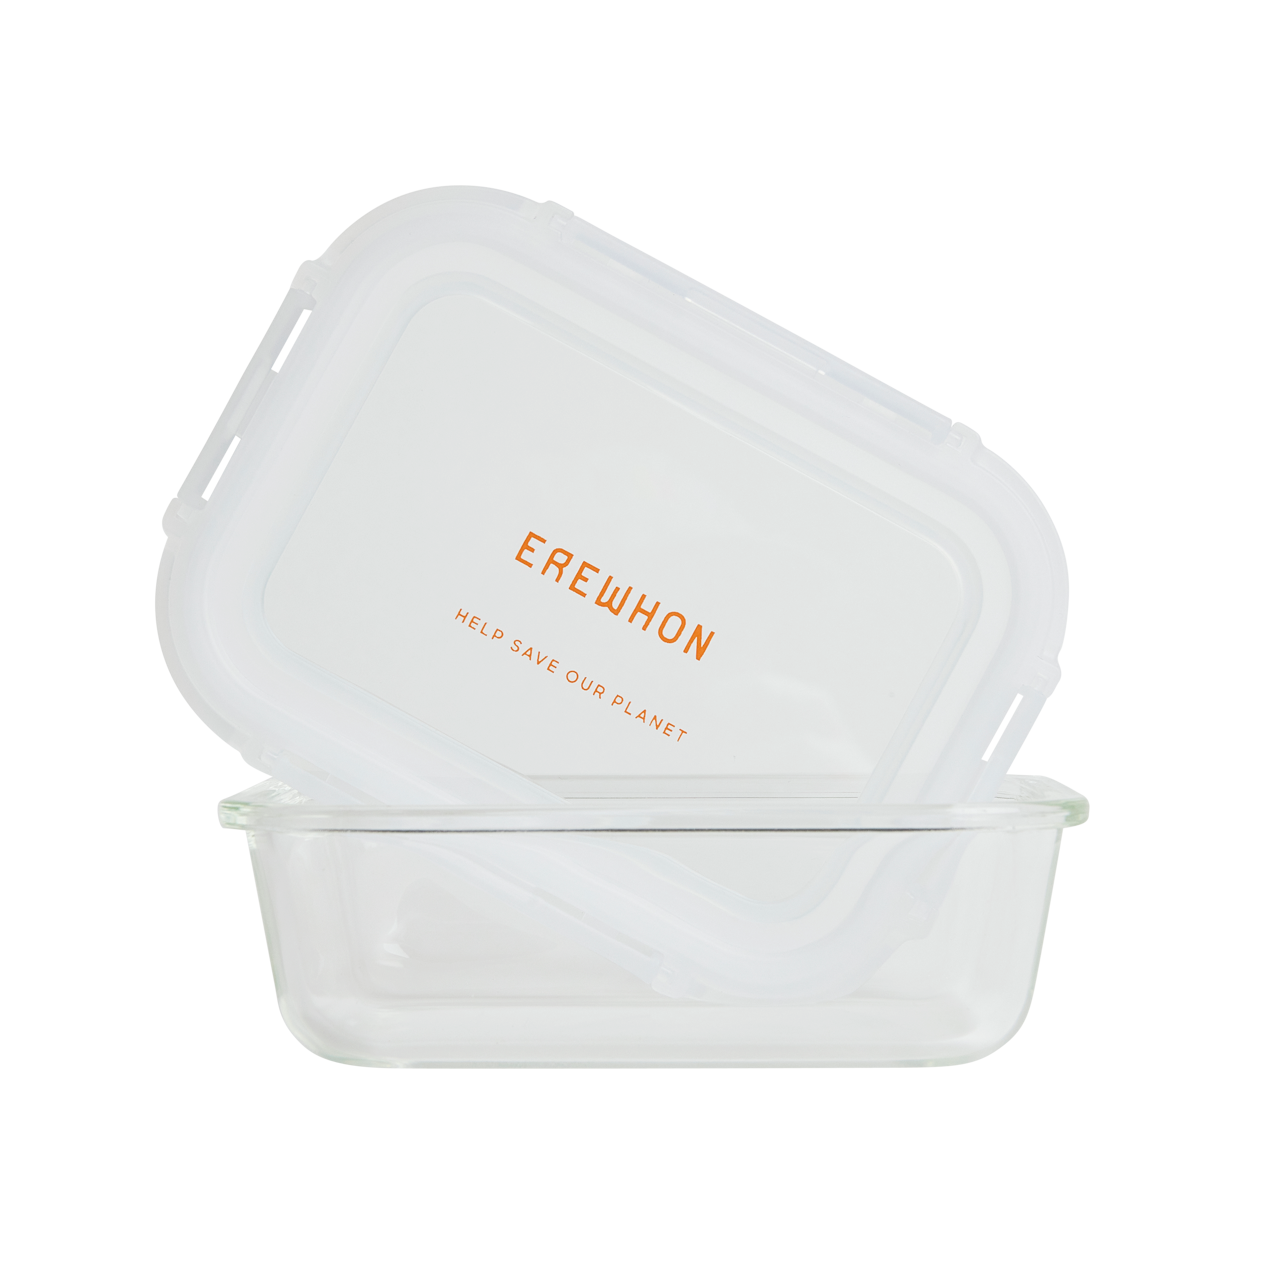 Erewhon Small Glass Storage Containers. Help Save the Planet